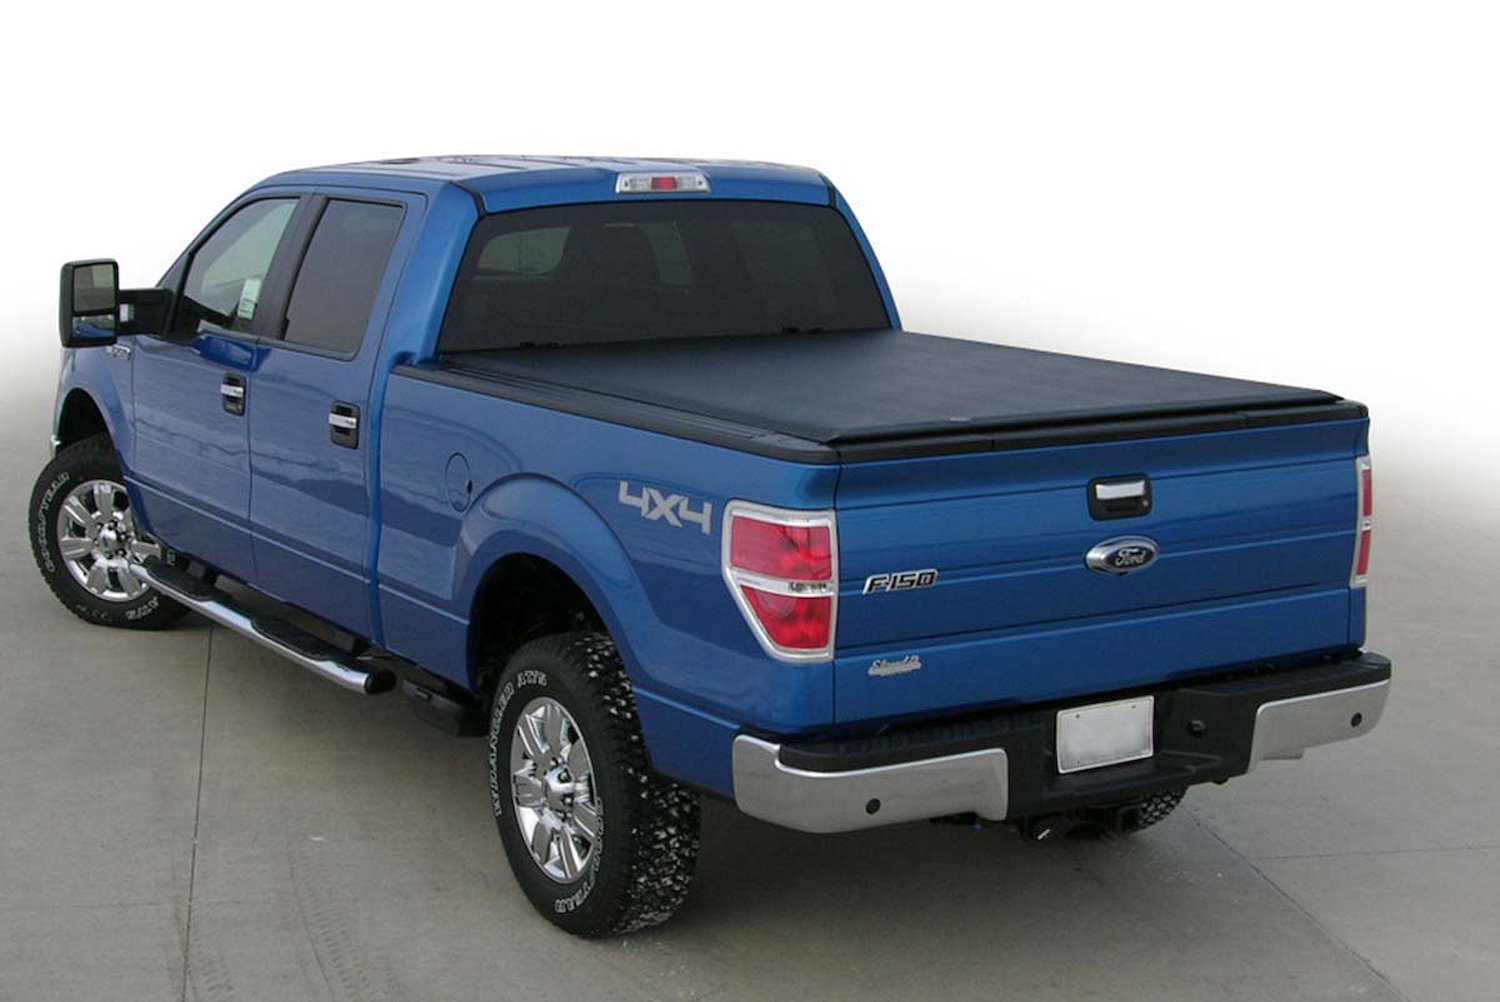 LORADO Roll-Up Tonneau Cover, Fits Select Ford F-250/F-350, with 6 ft. 8 in. Bed